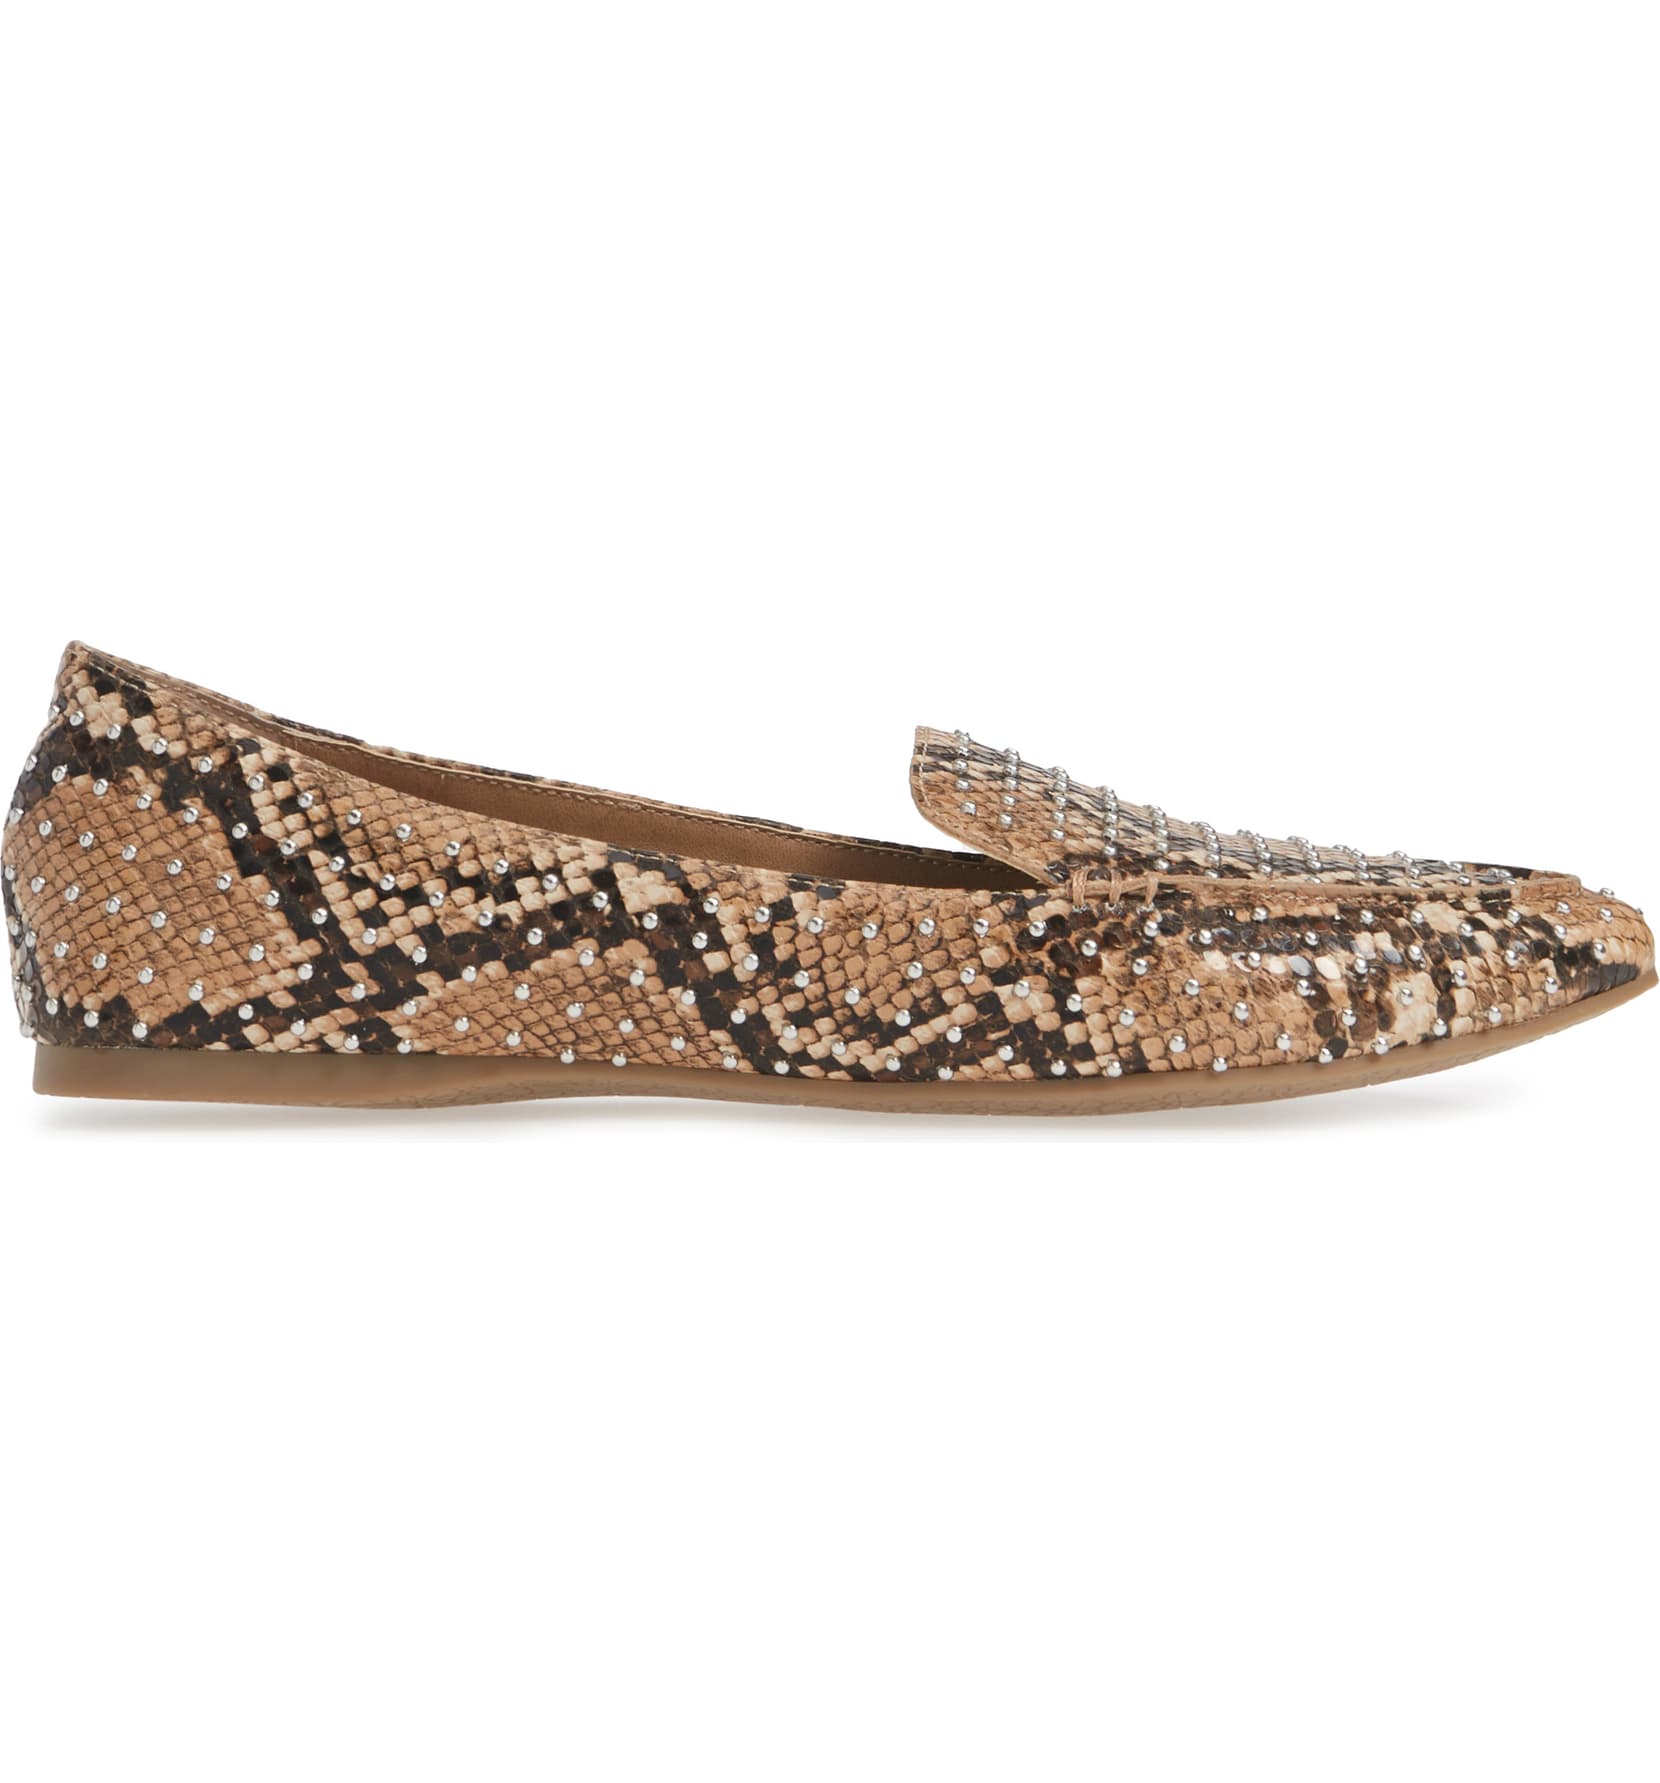 Buy > steve madden feather studded loafer > in stock